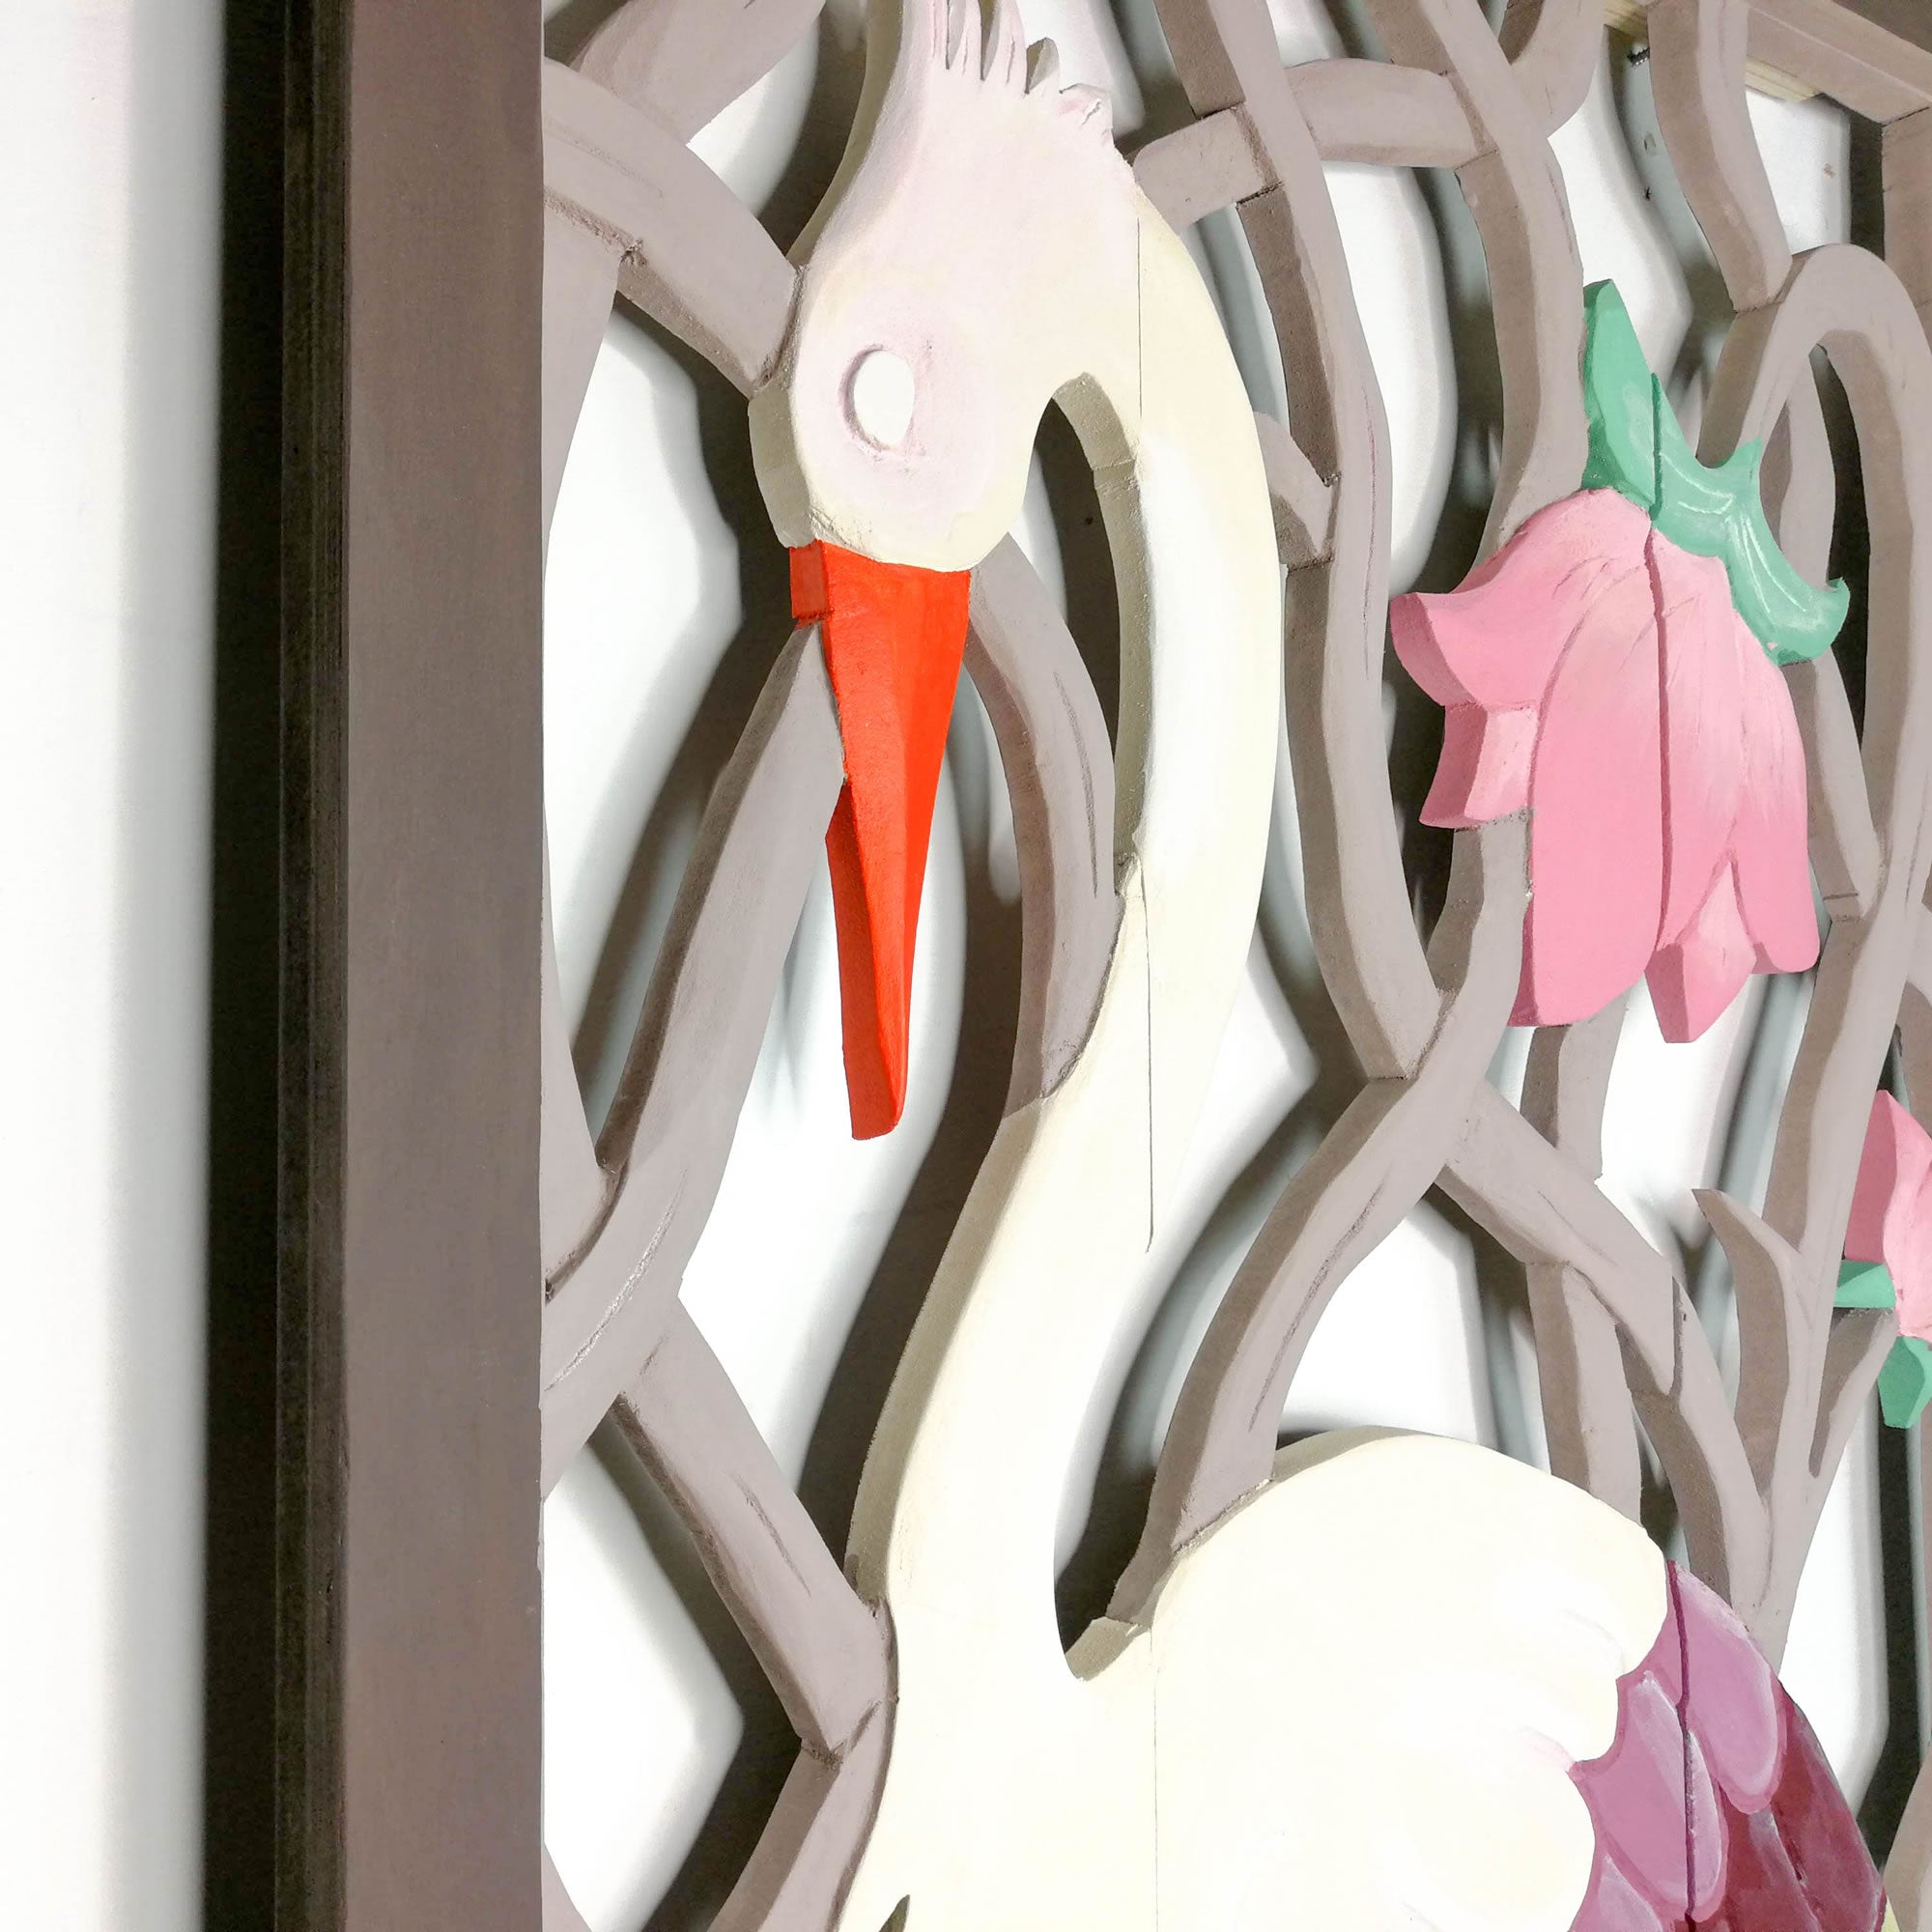 Carved Painted Wooden Wall Art - Large Headboard Decorative Bird Panel